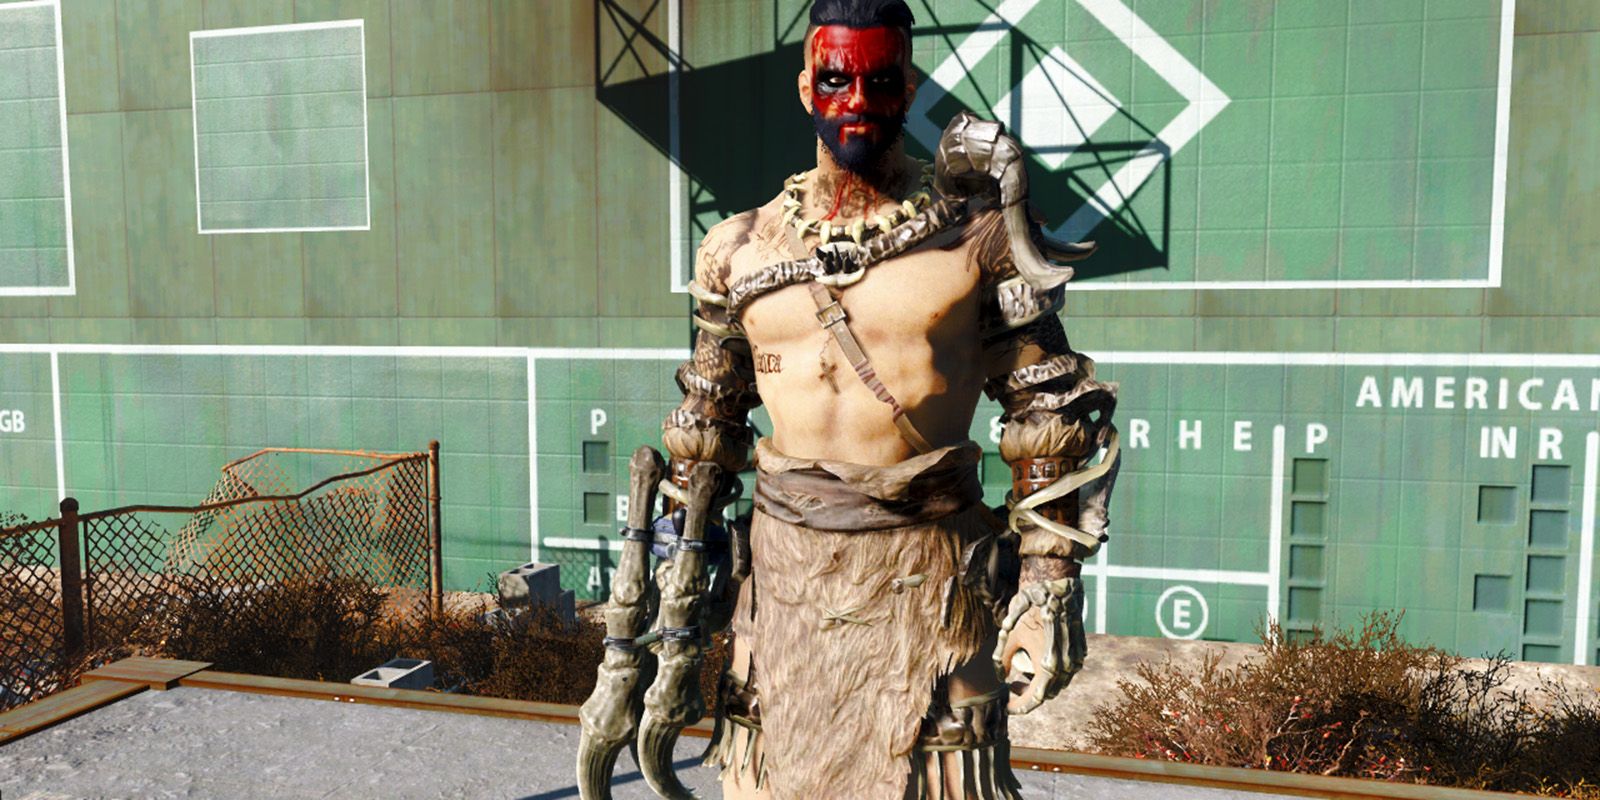 Character dressed in Deathclaw trappings in Fallout 4